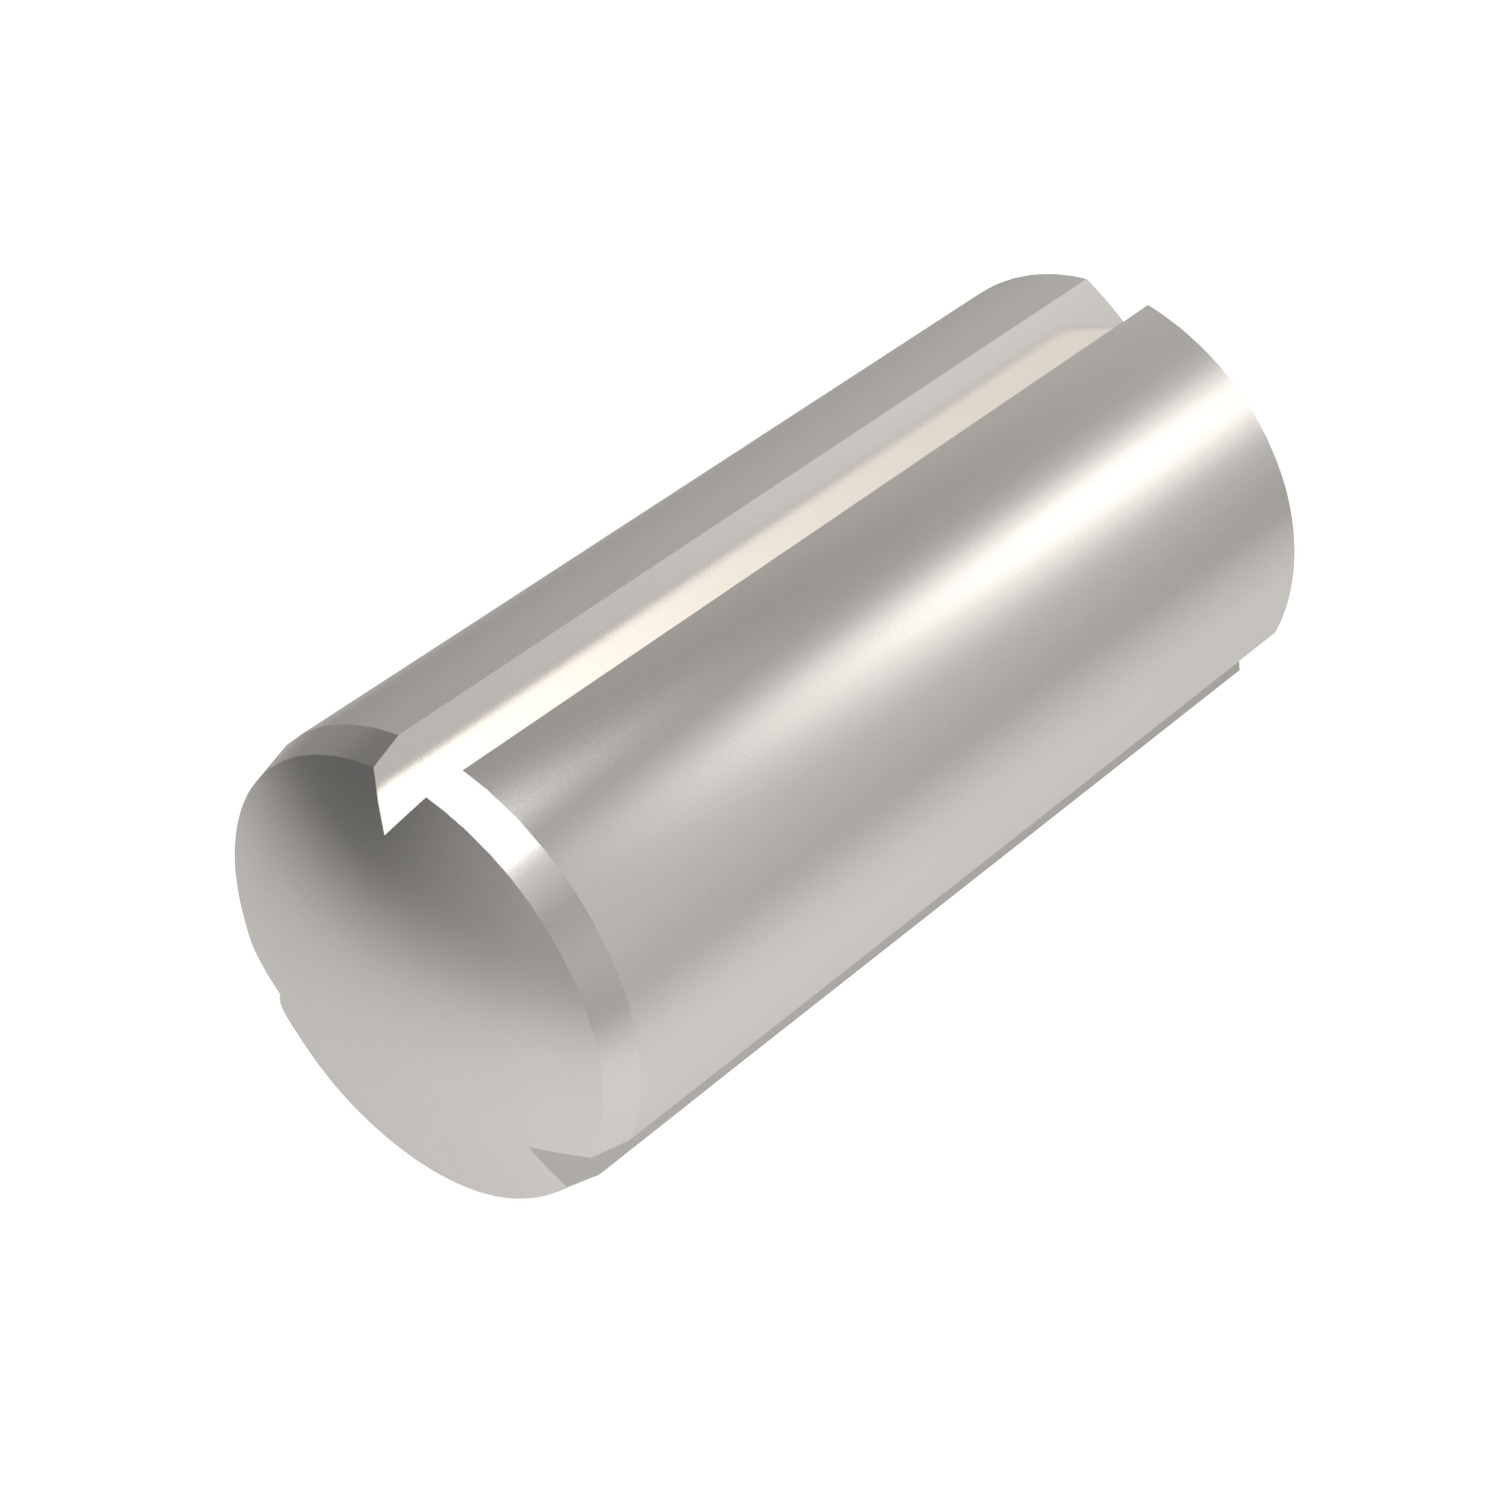 Product P1209, Stainless Grooved Pins  / 